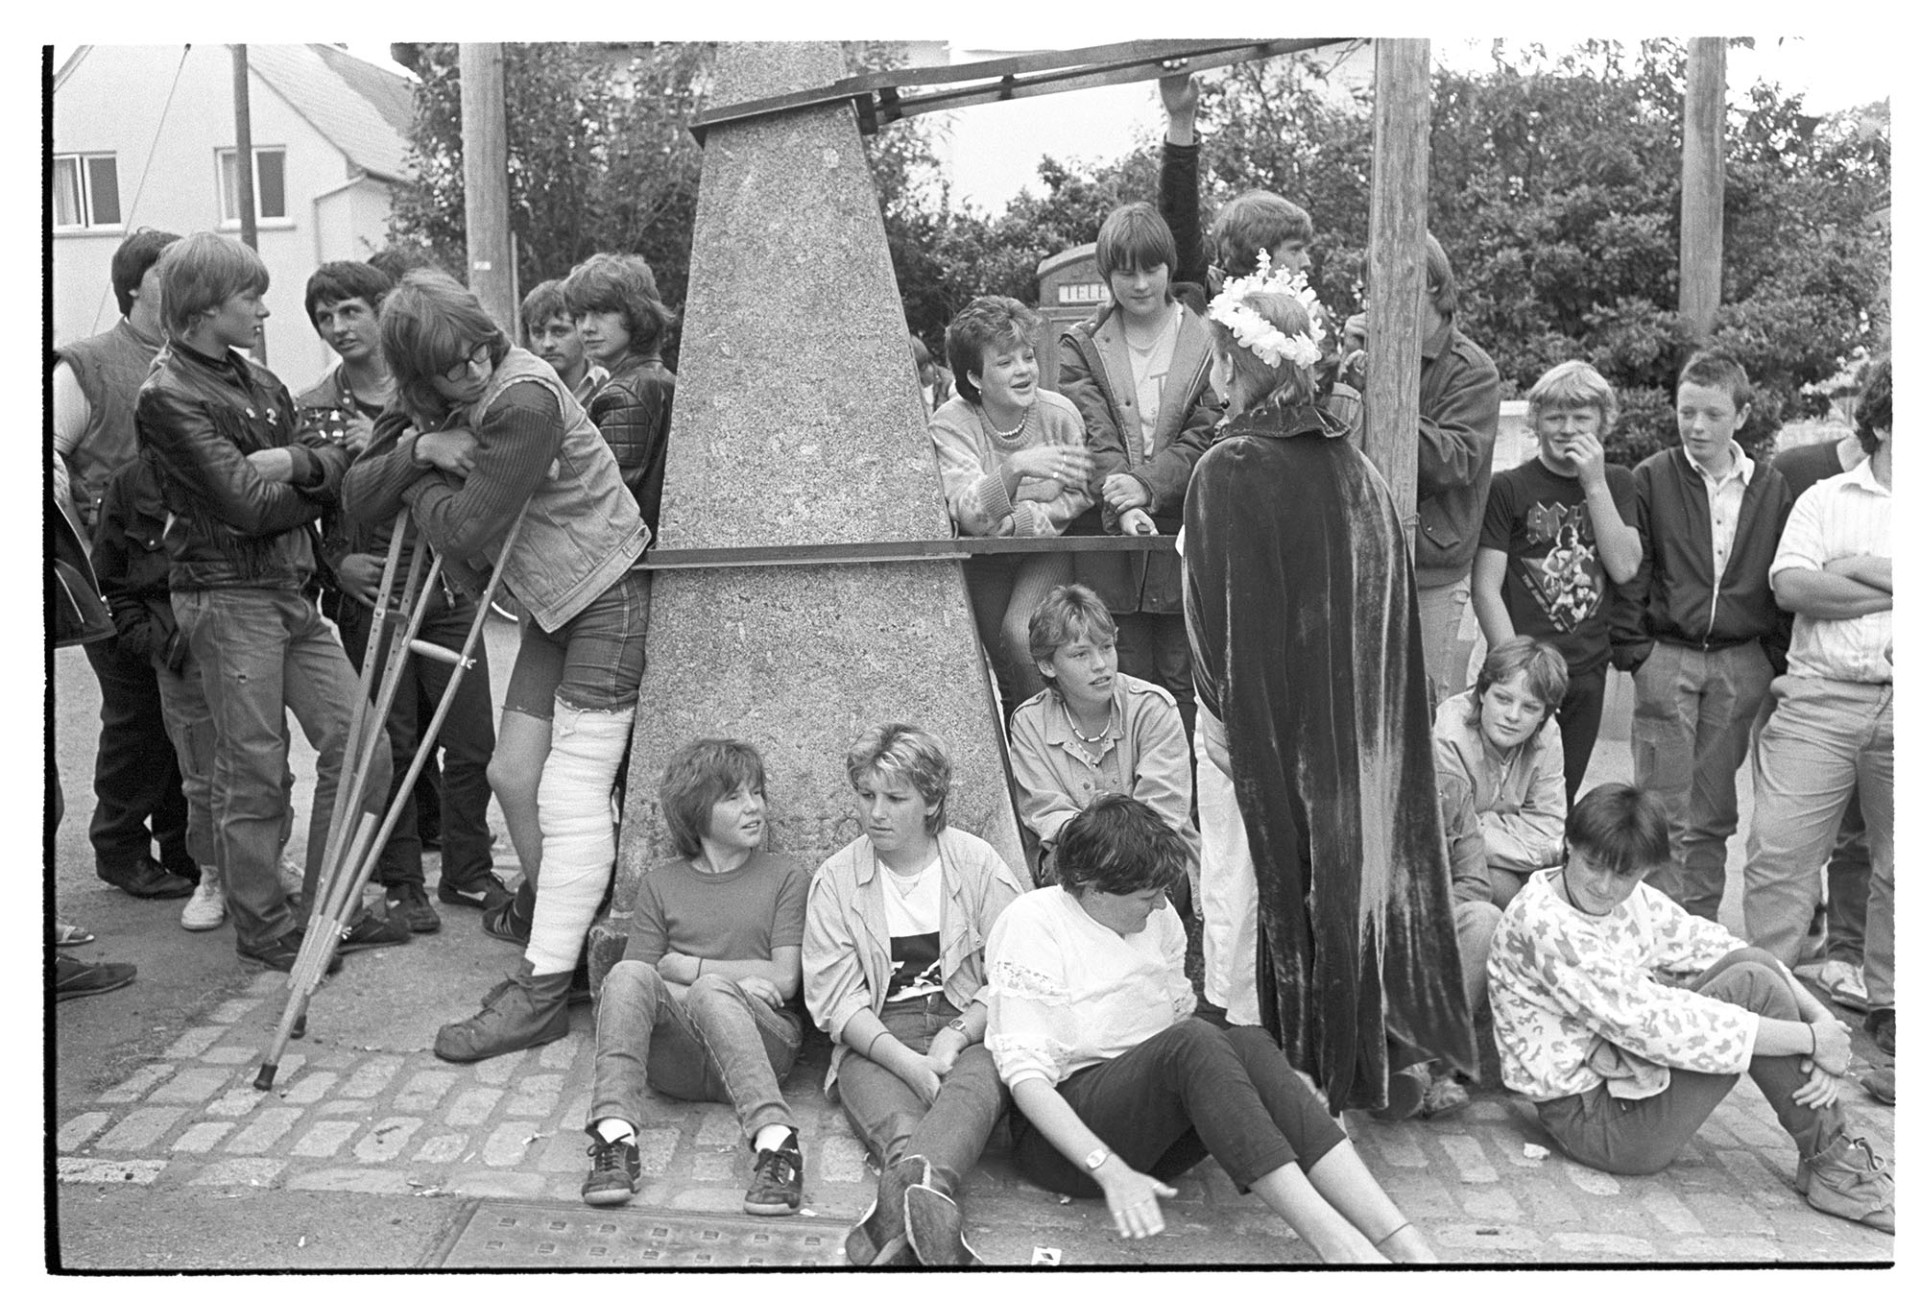 Crowd of young people around village pump at start of Fair. 
[A group of young men and women stood and sat around the village pump at the start of Winkleigh Fair. The Fair Queen is talking to some of the people and one young man has a pair of crutches.]